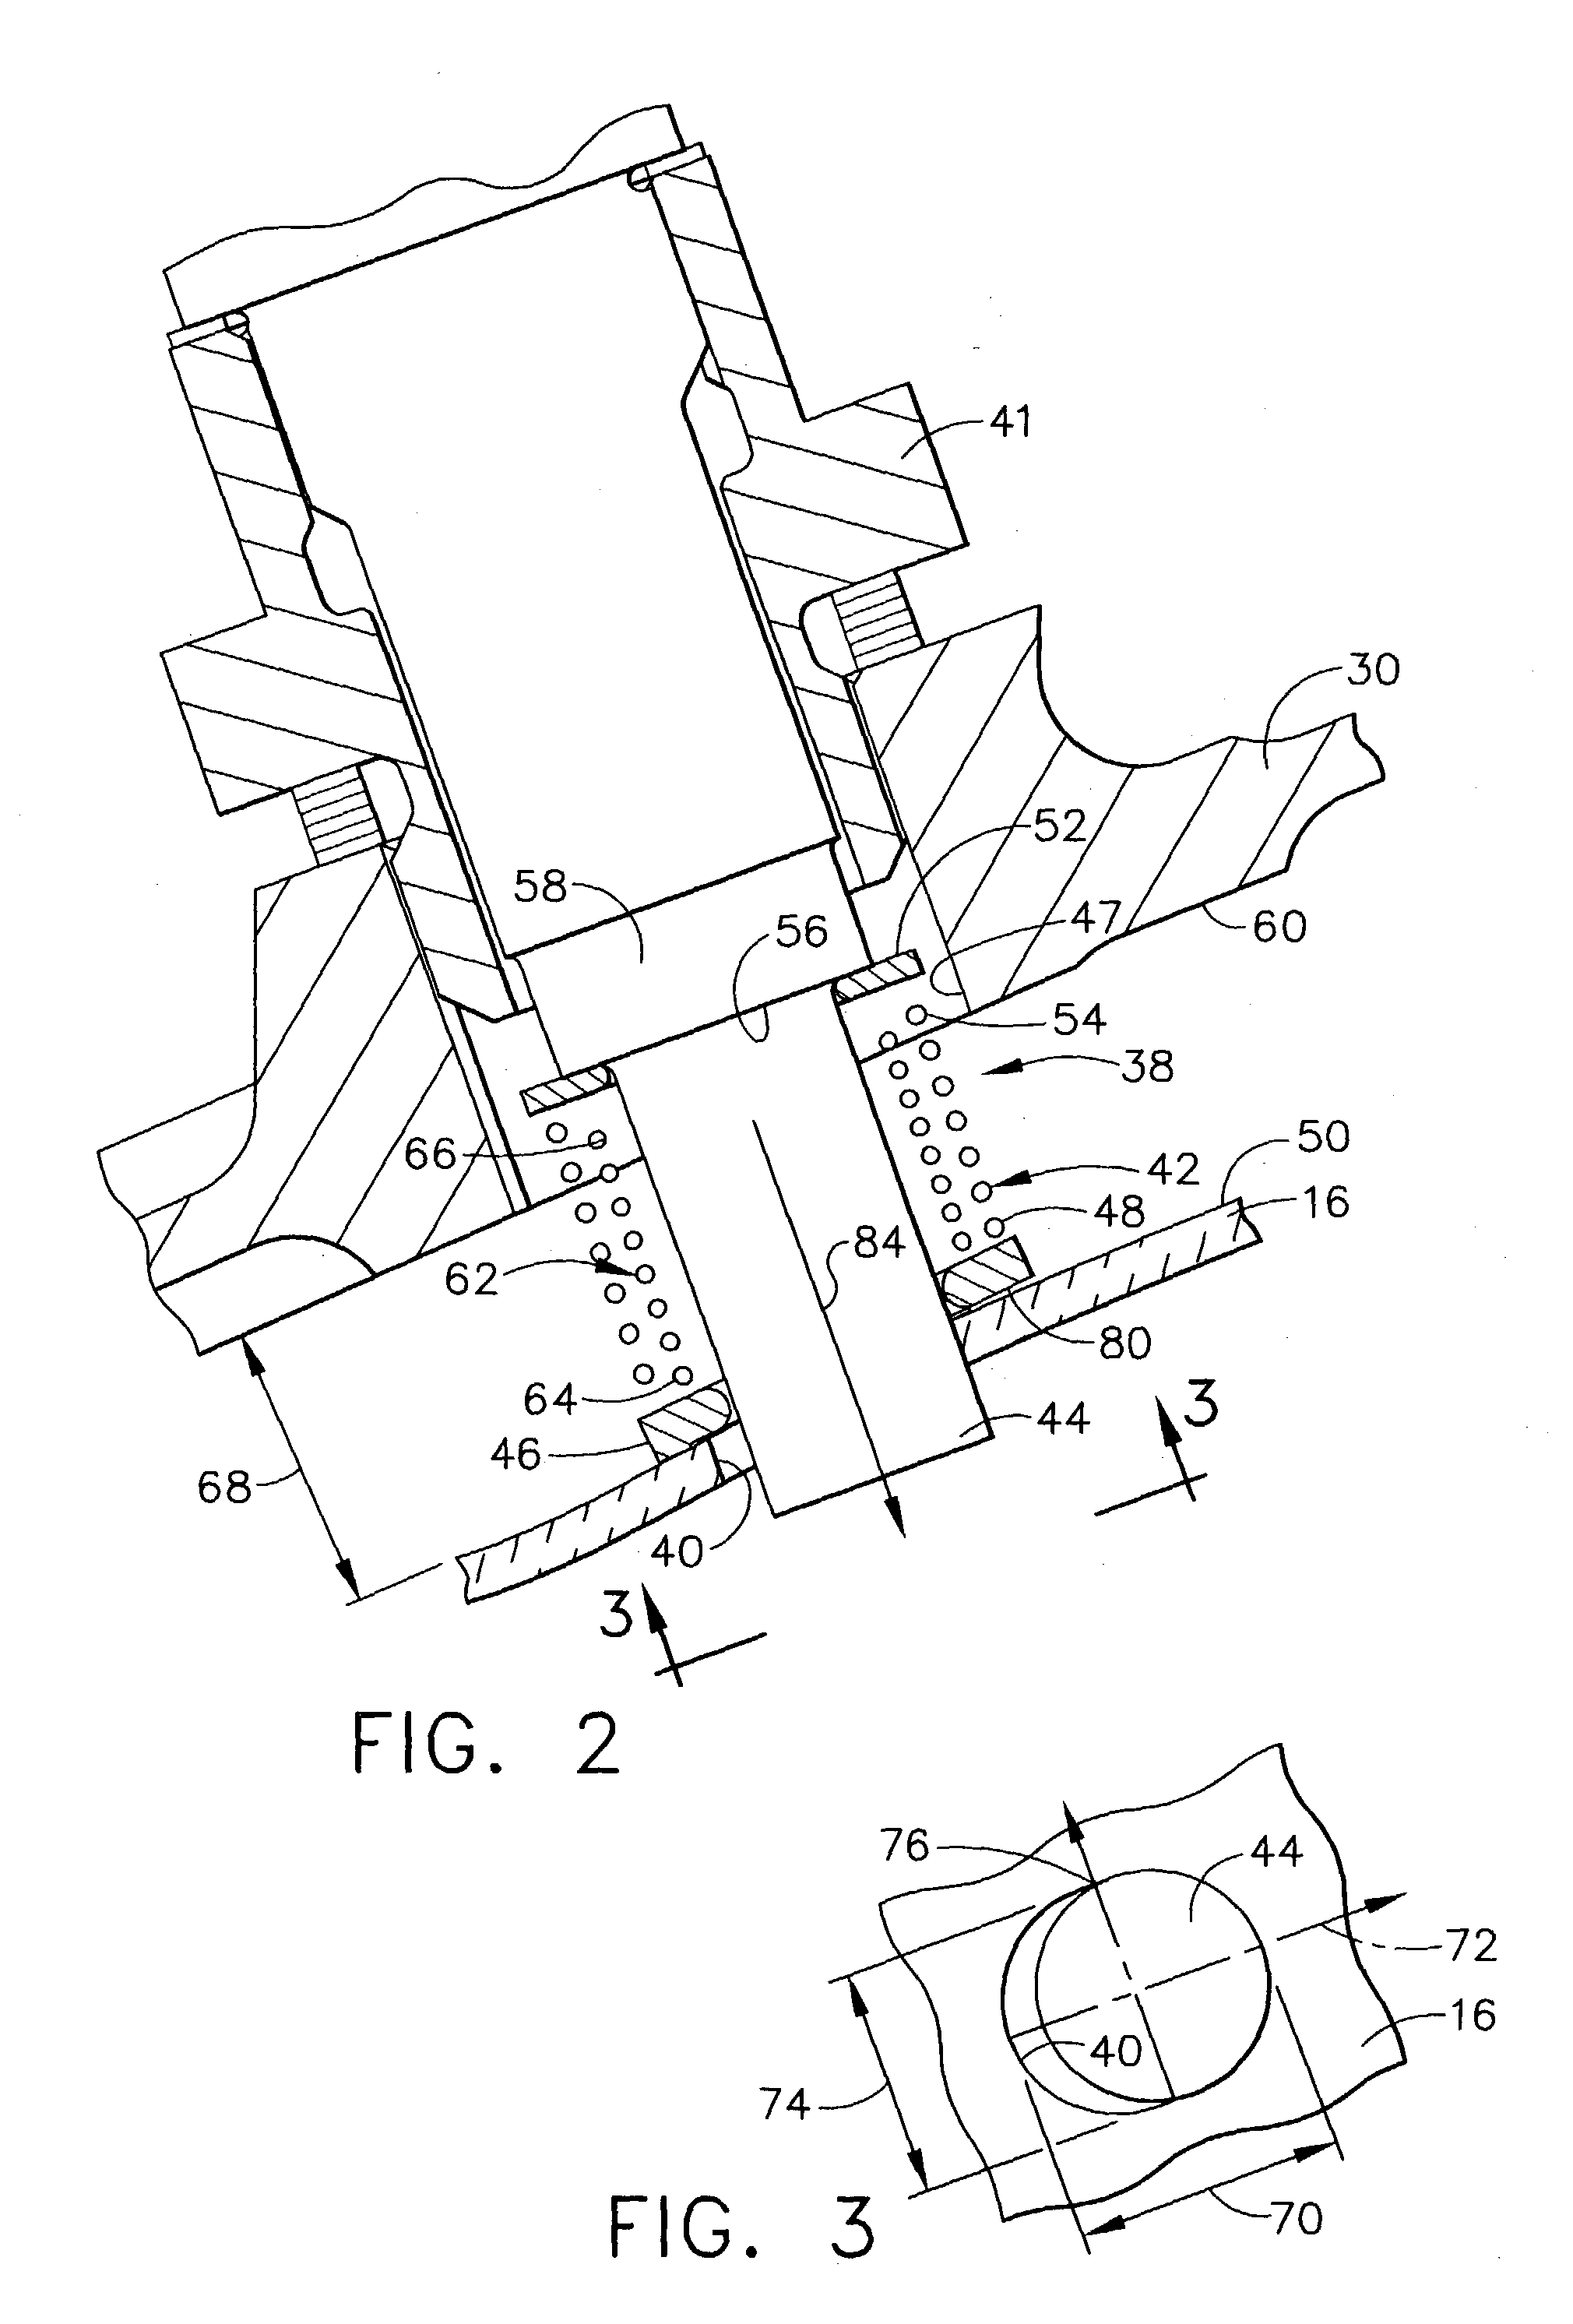 Mounting assembly for igniter in a gas turbine engine combustor having a ceramic matrix composite liner